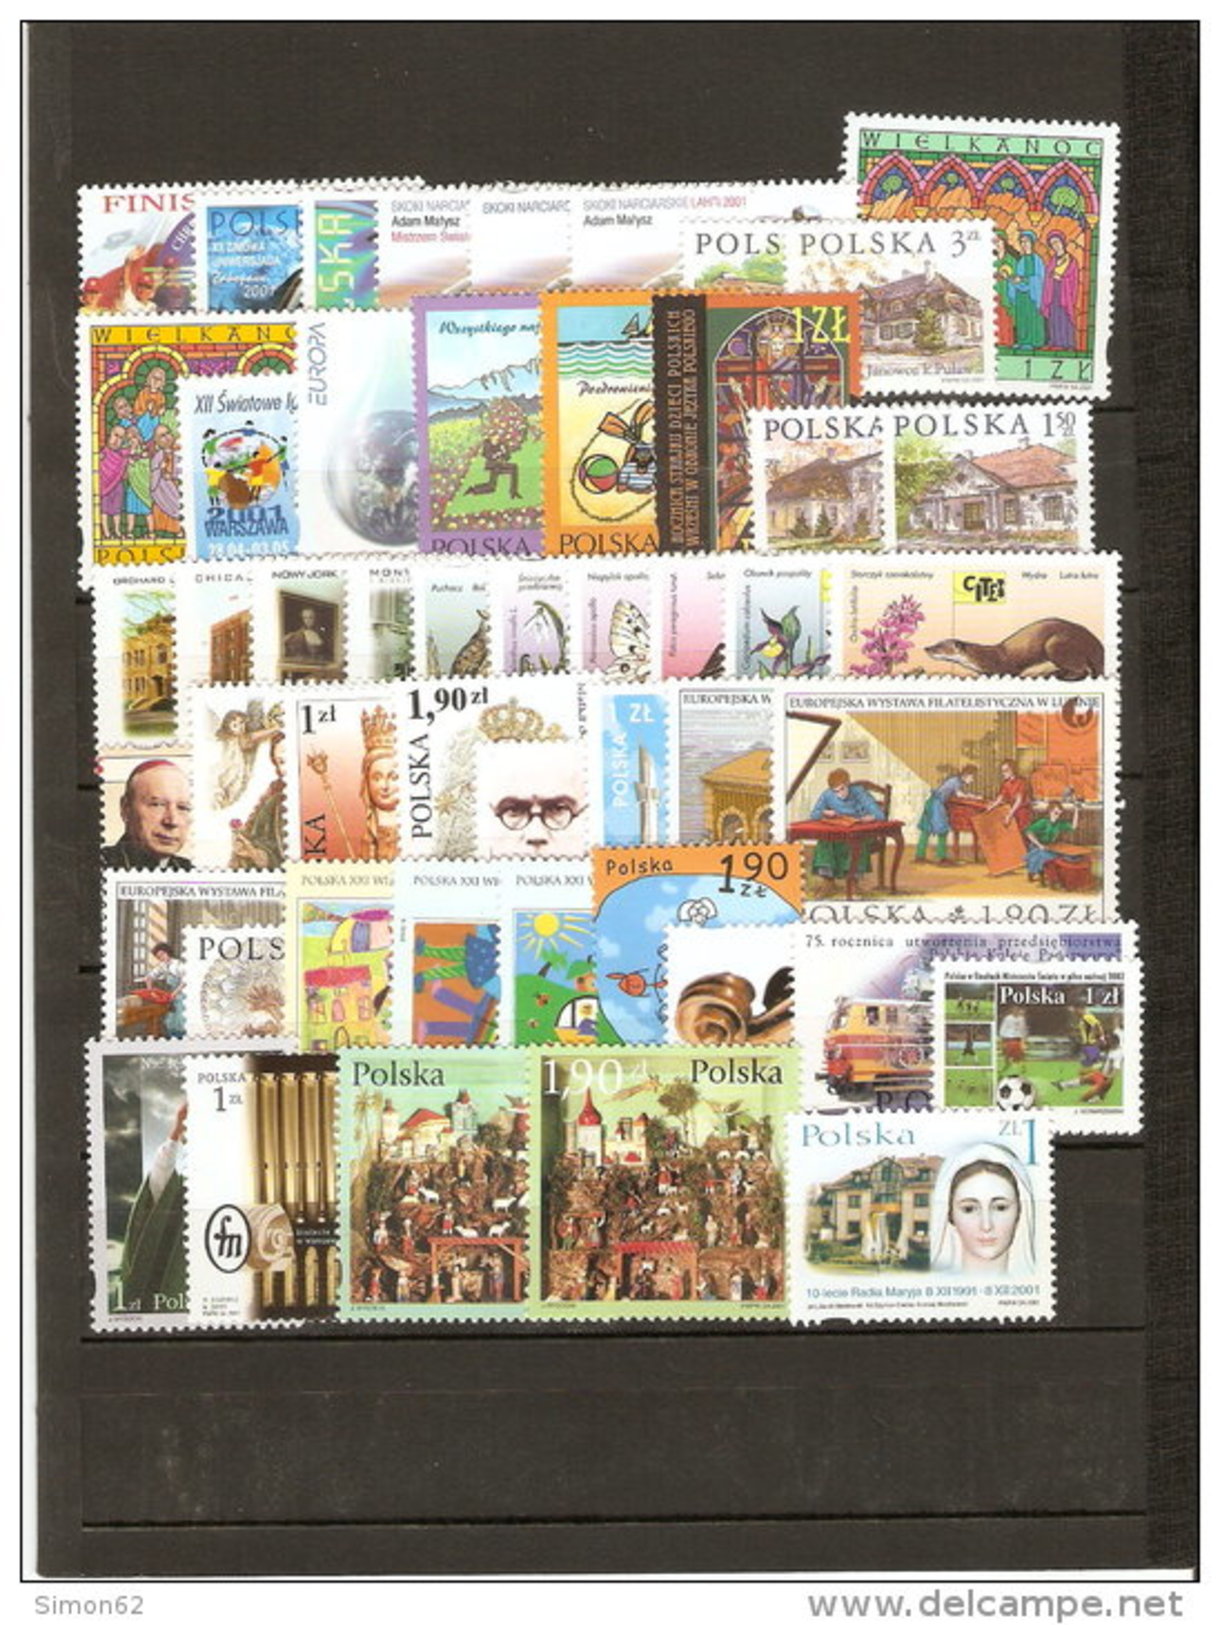 POLOGNE Année Complète 2001 Neuf ** Mnh Luxe + Feuillet Quo- Vadis  49 Timbres  Avec Tete Beche - Full Years